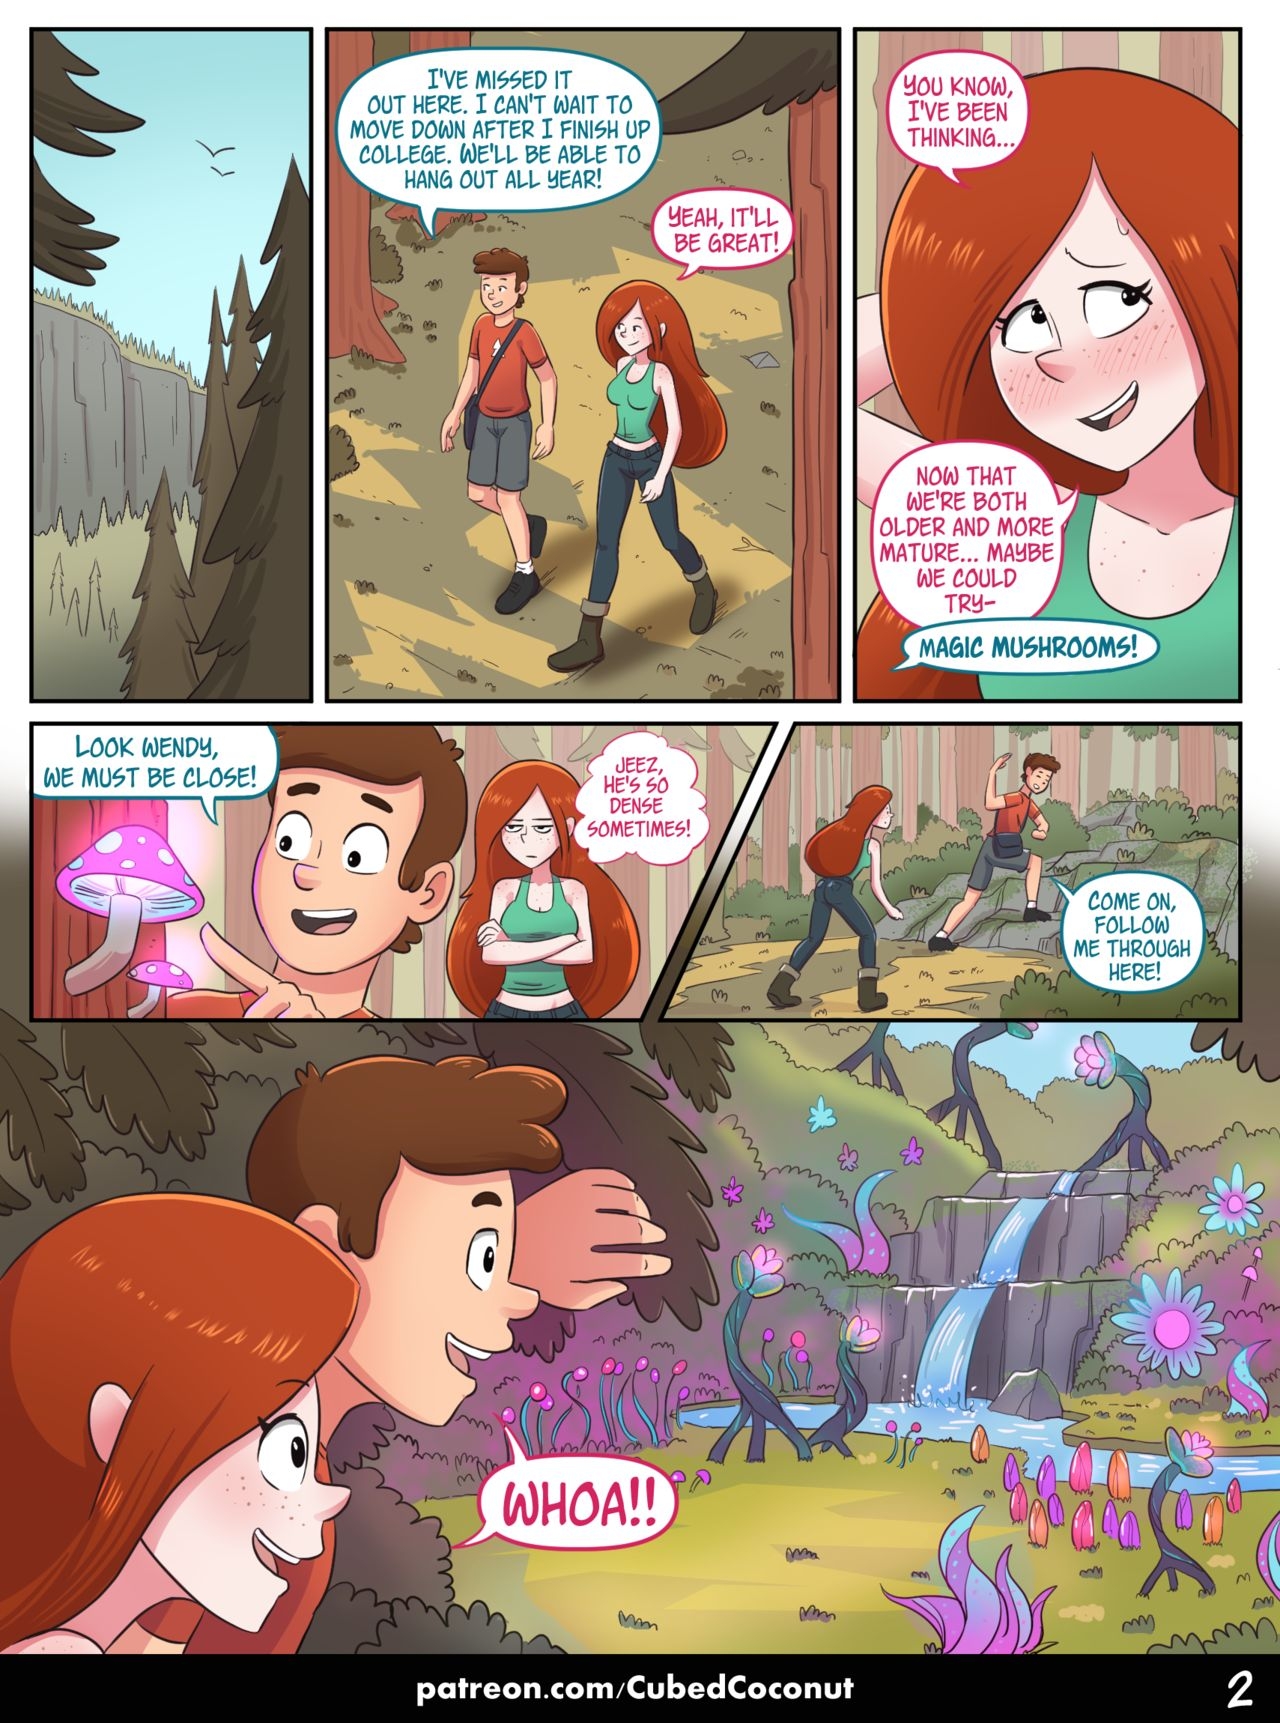 [Cubed Coconut] Wendy's Confession (Gravity Falls) 2